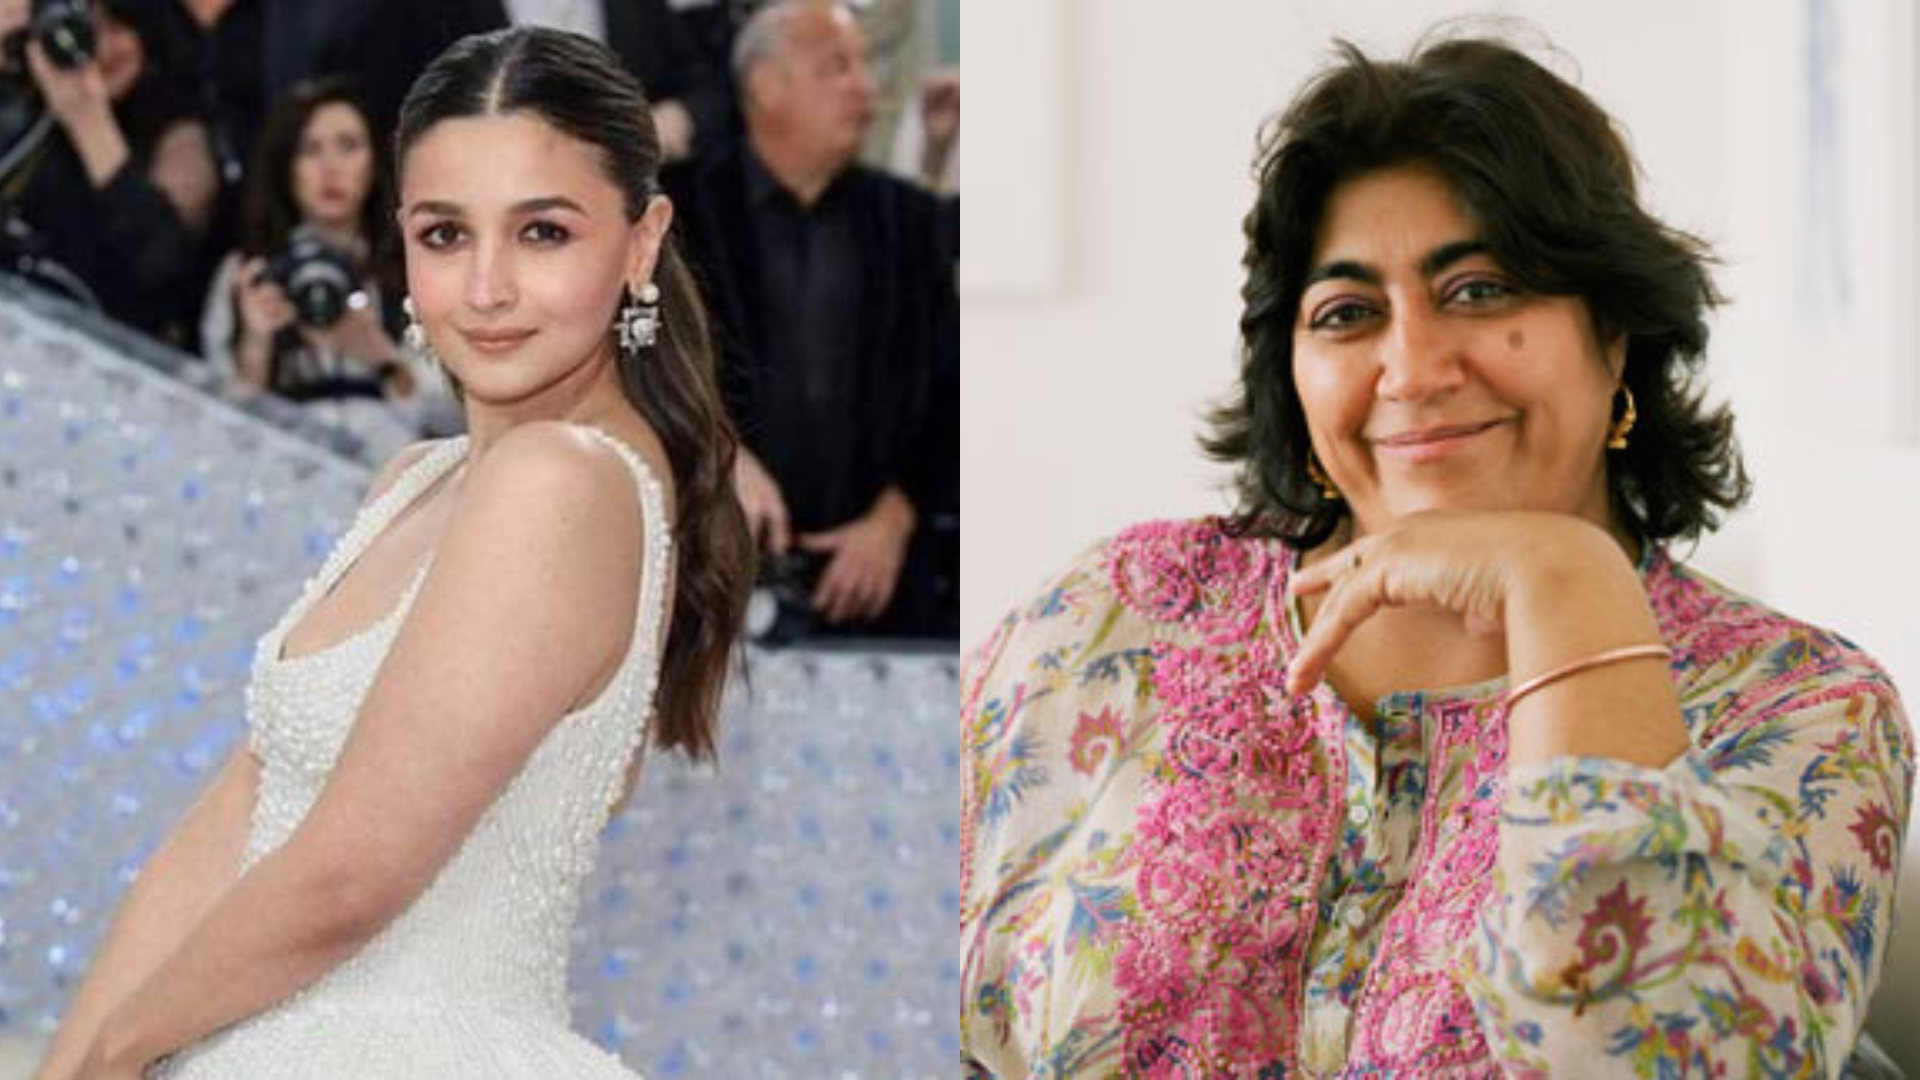 Will Alia Bhatt Play The Role Of An Indian Princess In A Disney Musical? Gurinder Chadha Opens Up About The Rumours